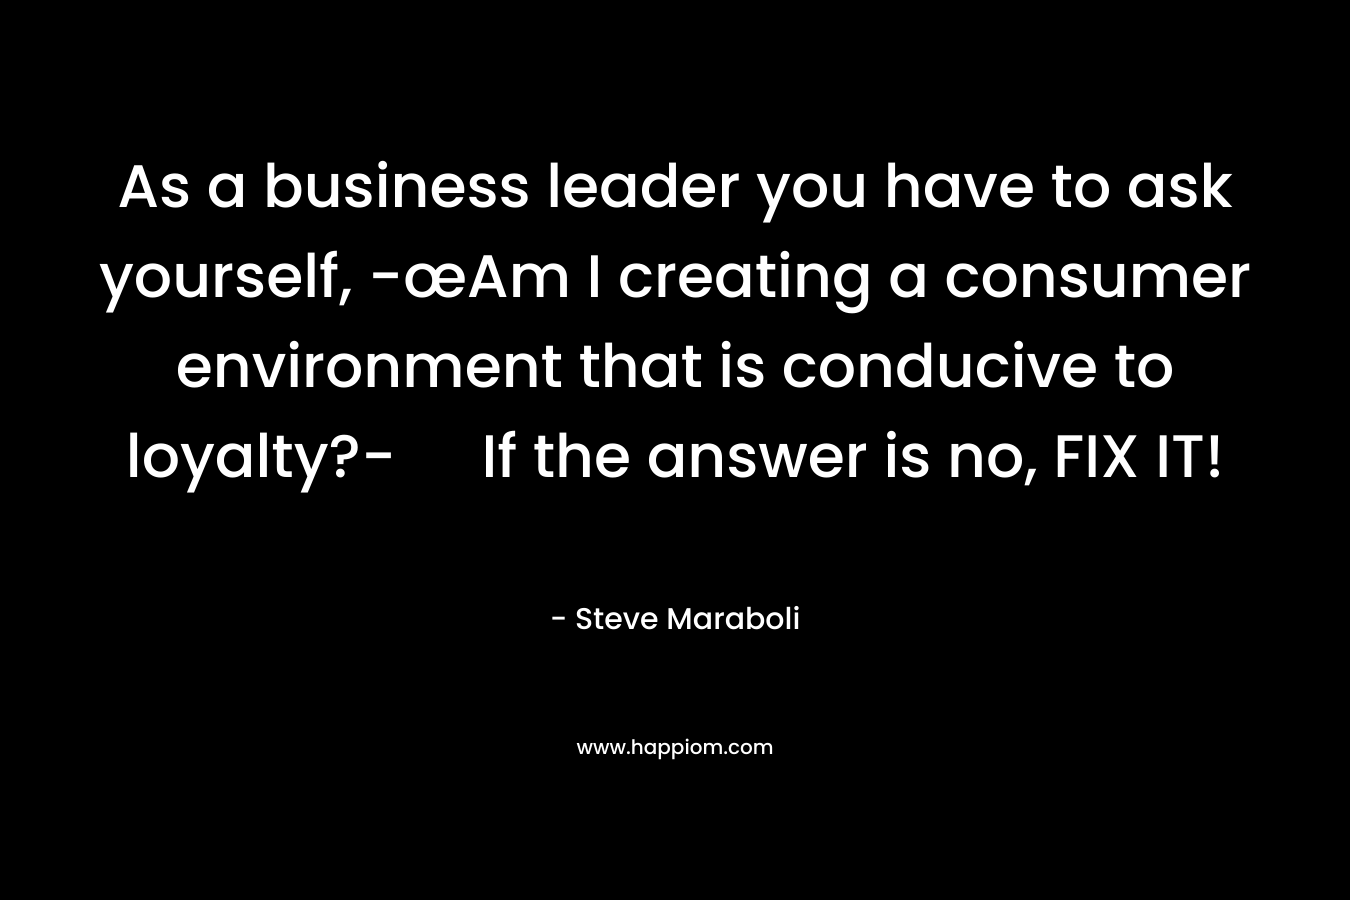 As a business leader you have to ask yourself, -œAm I creating a consumer environment that is conducive to loyalty?- If the answer is no, FIX IT!